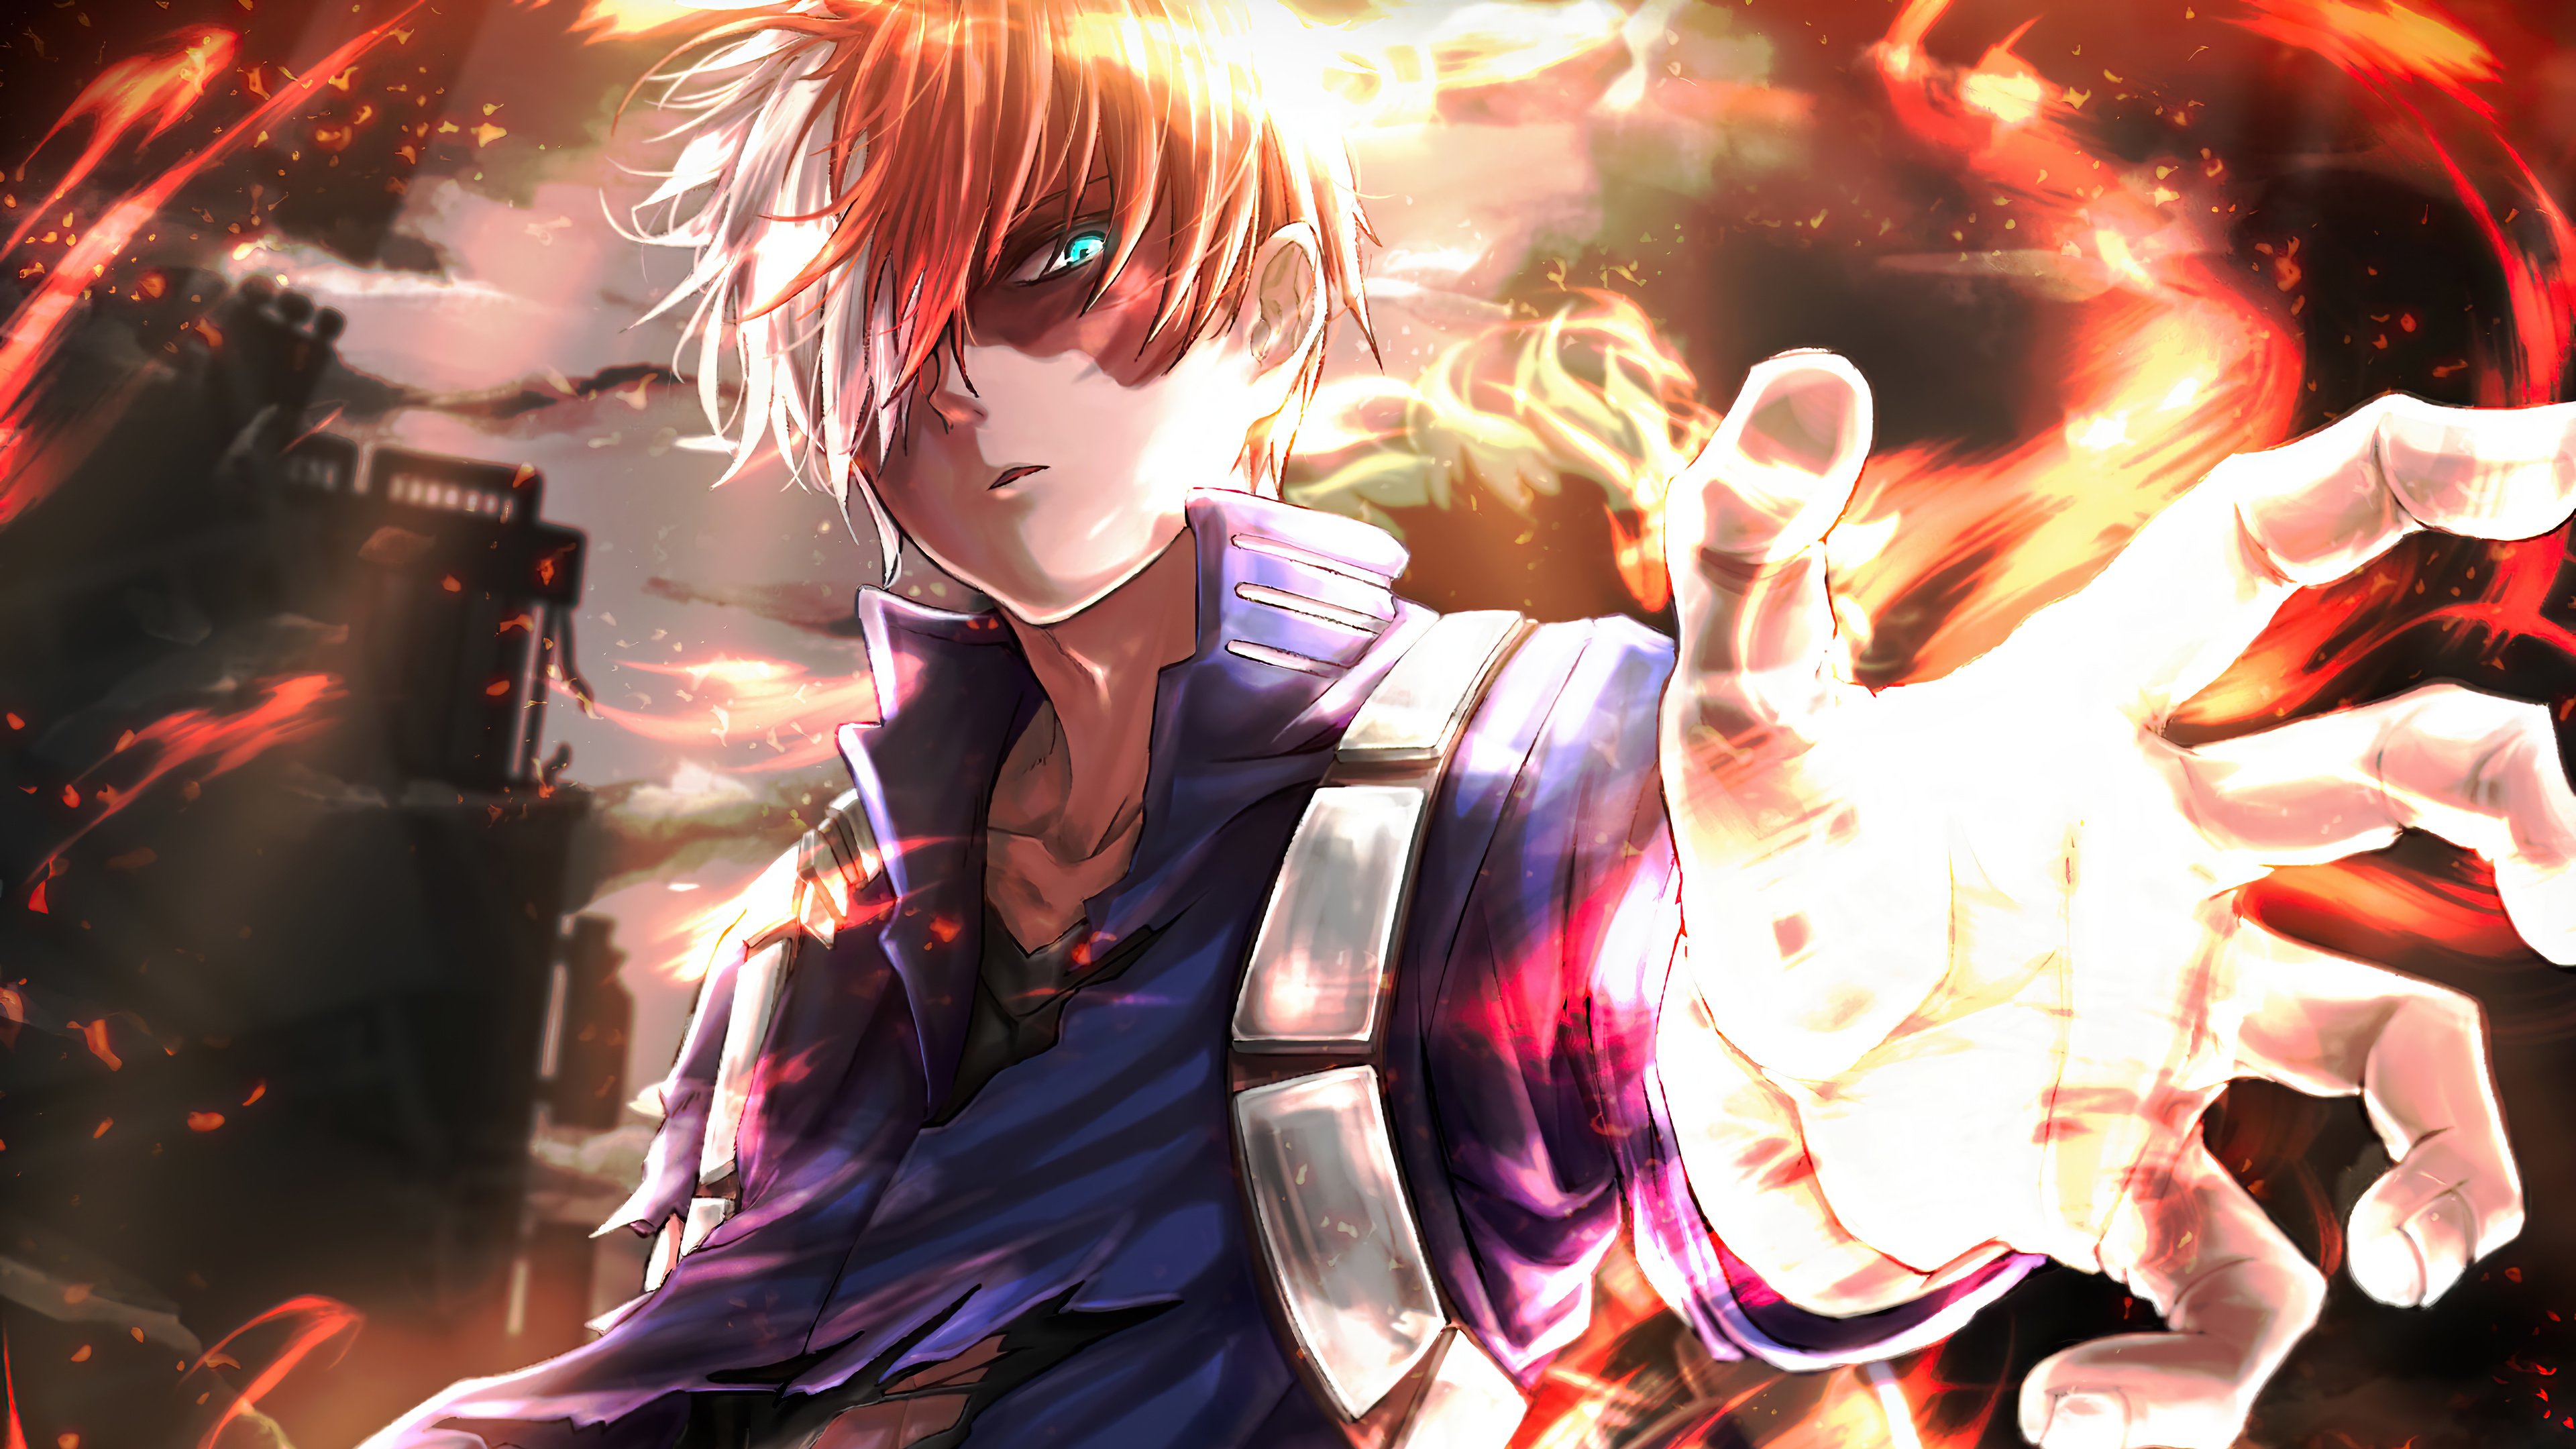 Shoto Todoroki From My Hero Academia Wallpaper Hd Anime K Wallpapers Images Photos And Reverasite